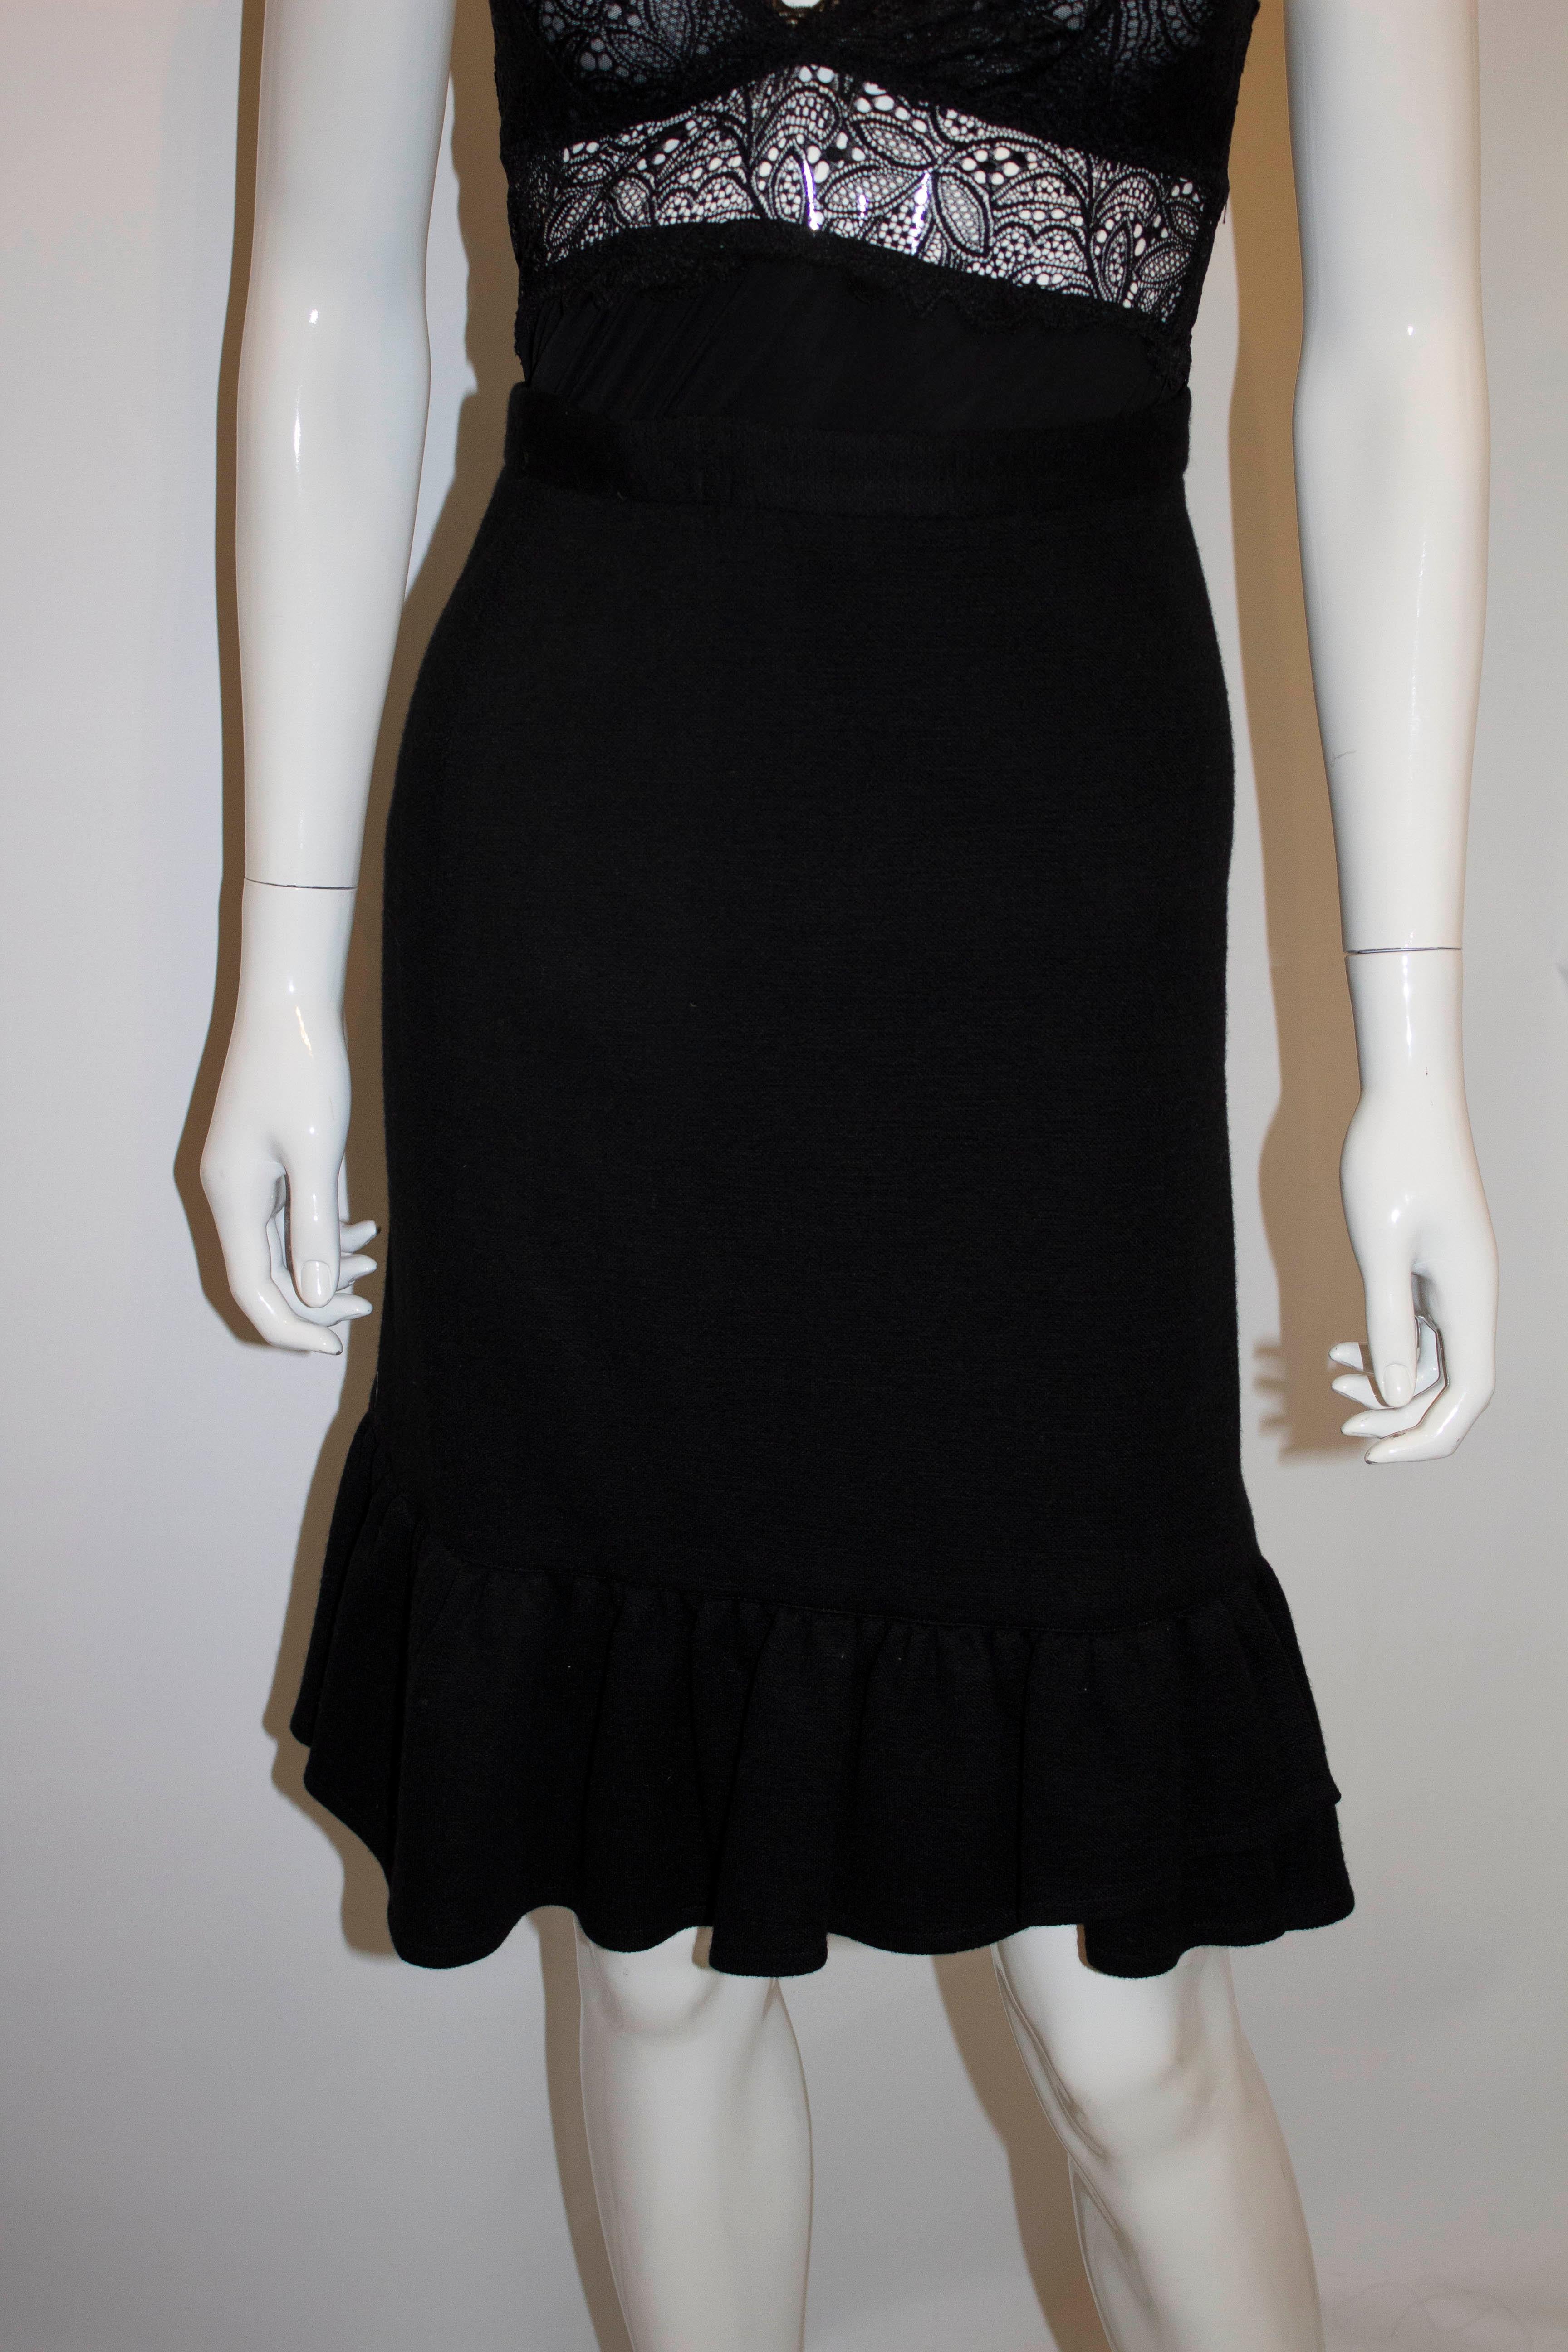 A fun and flirty black wool skirt by Sonia Rykiel, main line. The skirt has a side zip fastening, with interesting frill detail at the hem. It is unlined. Size 40, waist 26'' , length 23''